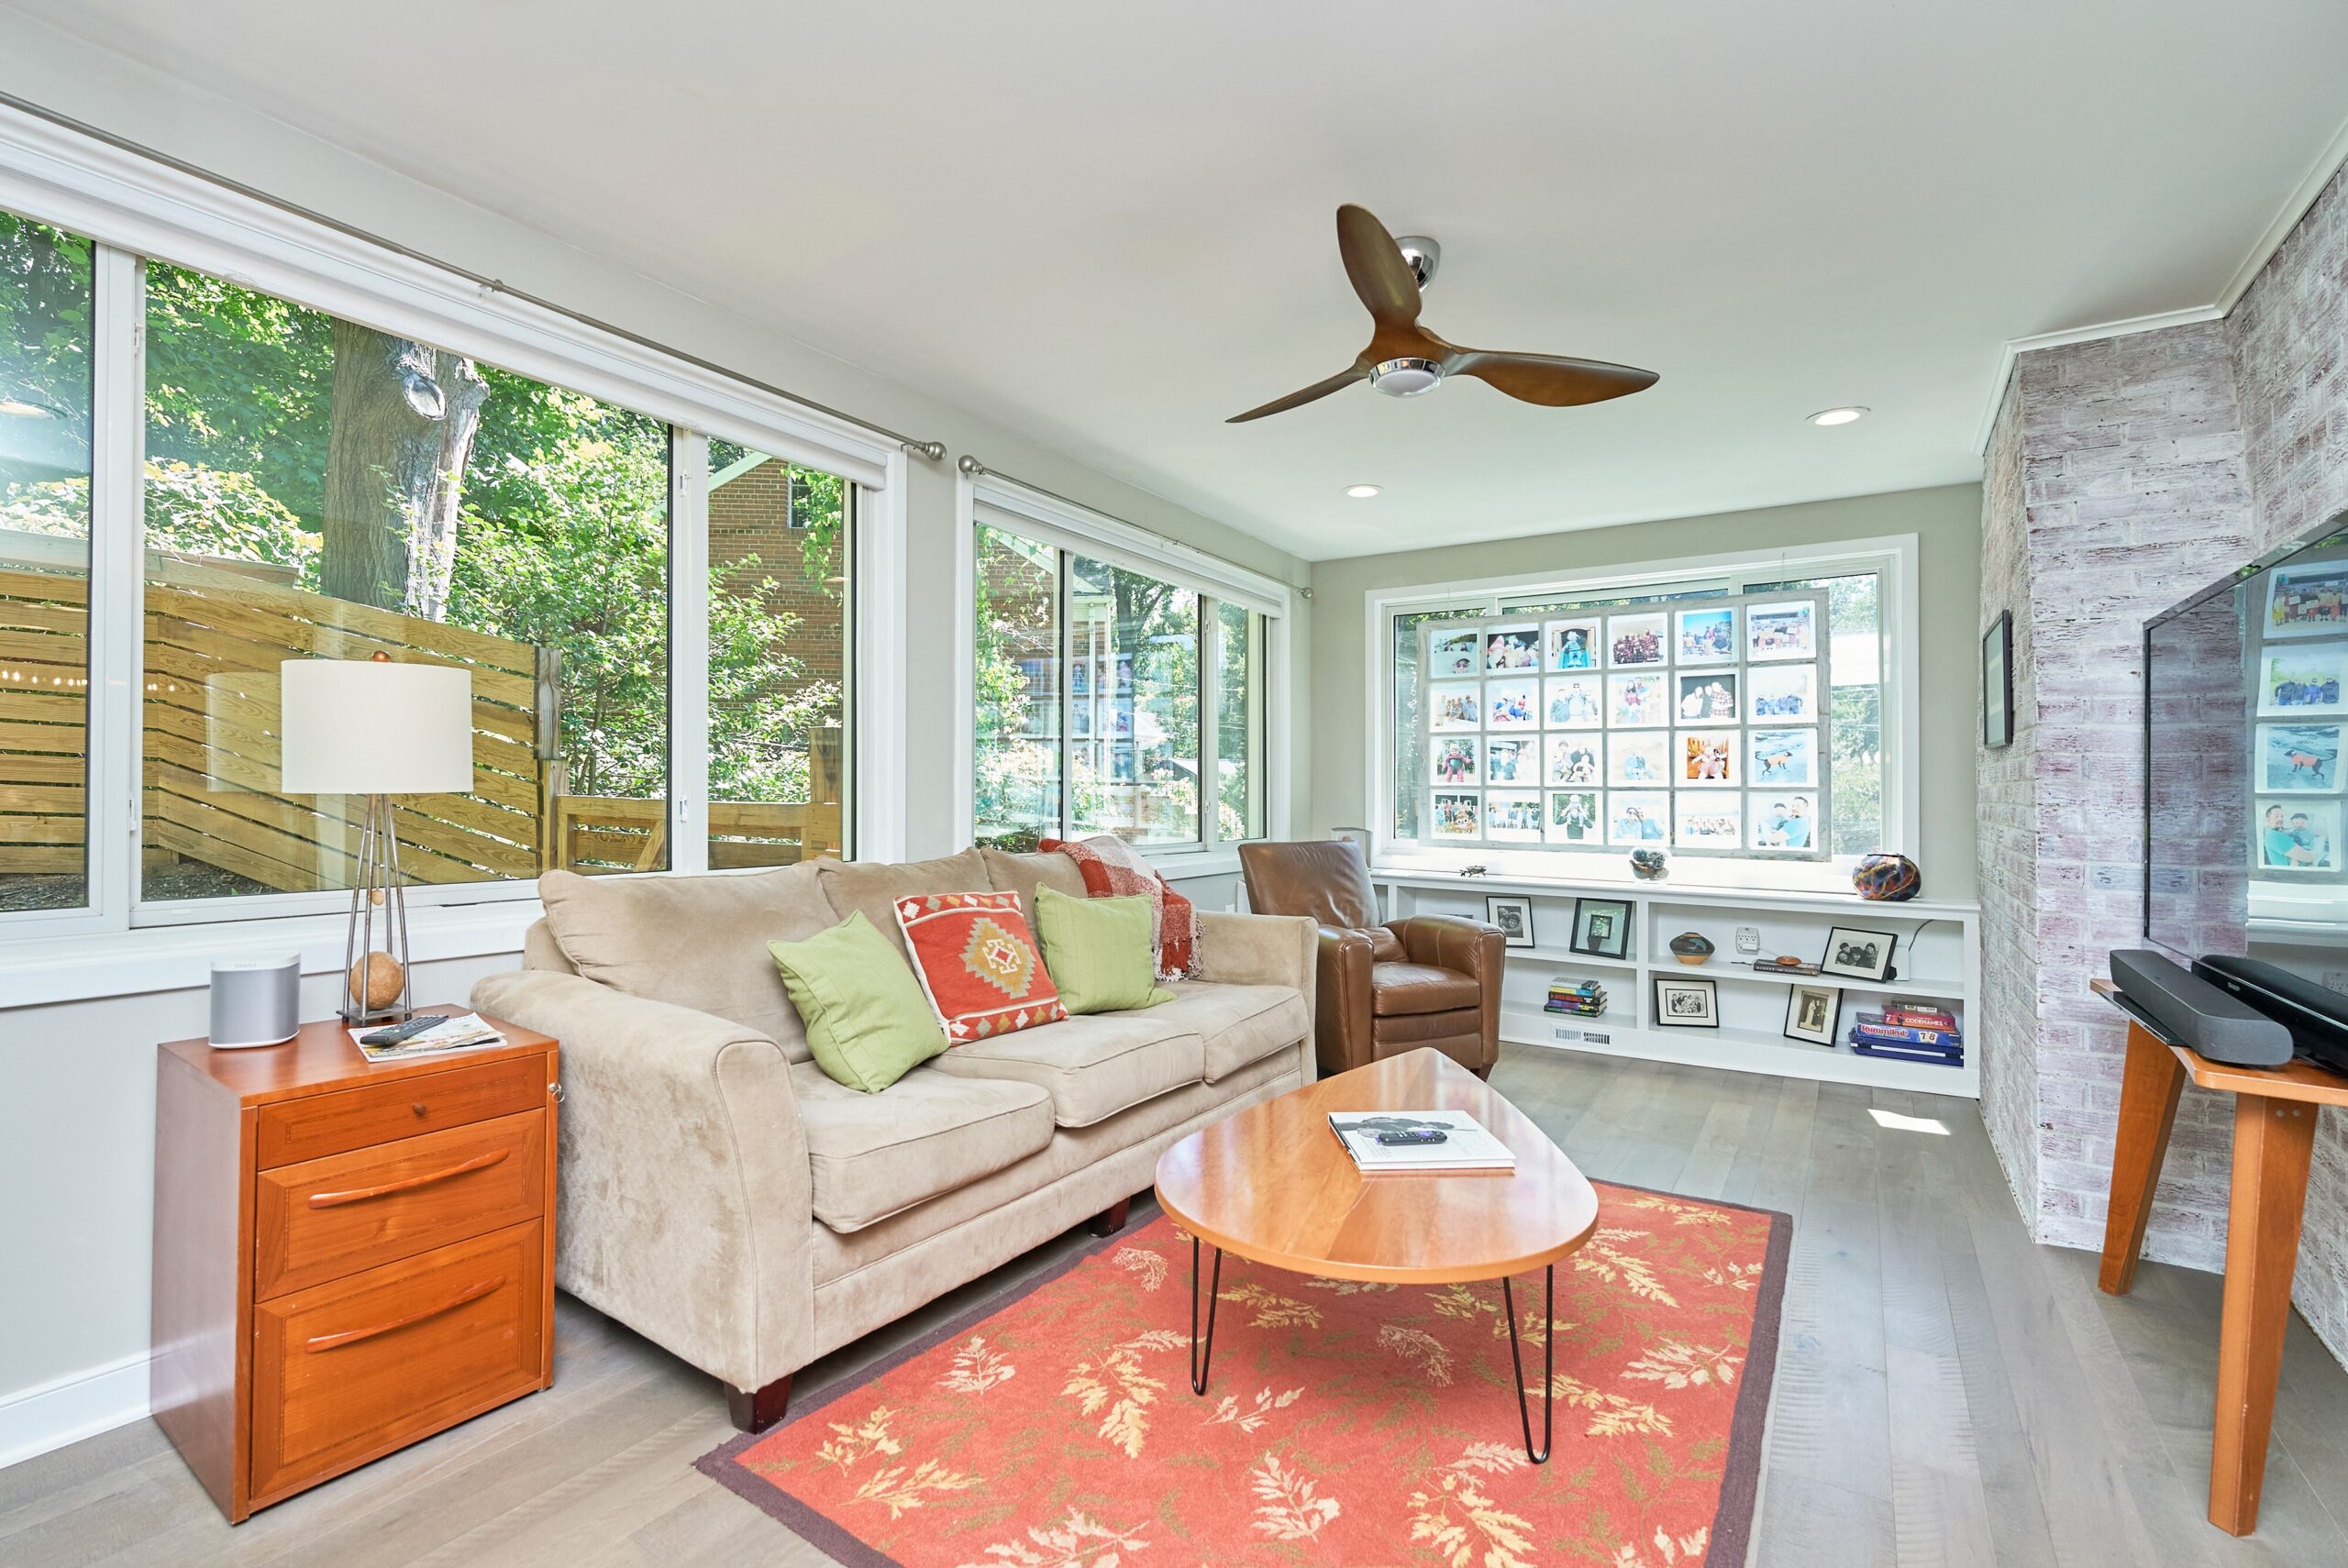 Professional photo of interior of custom home in Falls Church, Virginia. Shows TV area with windows on two sides.